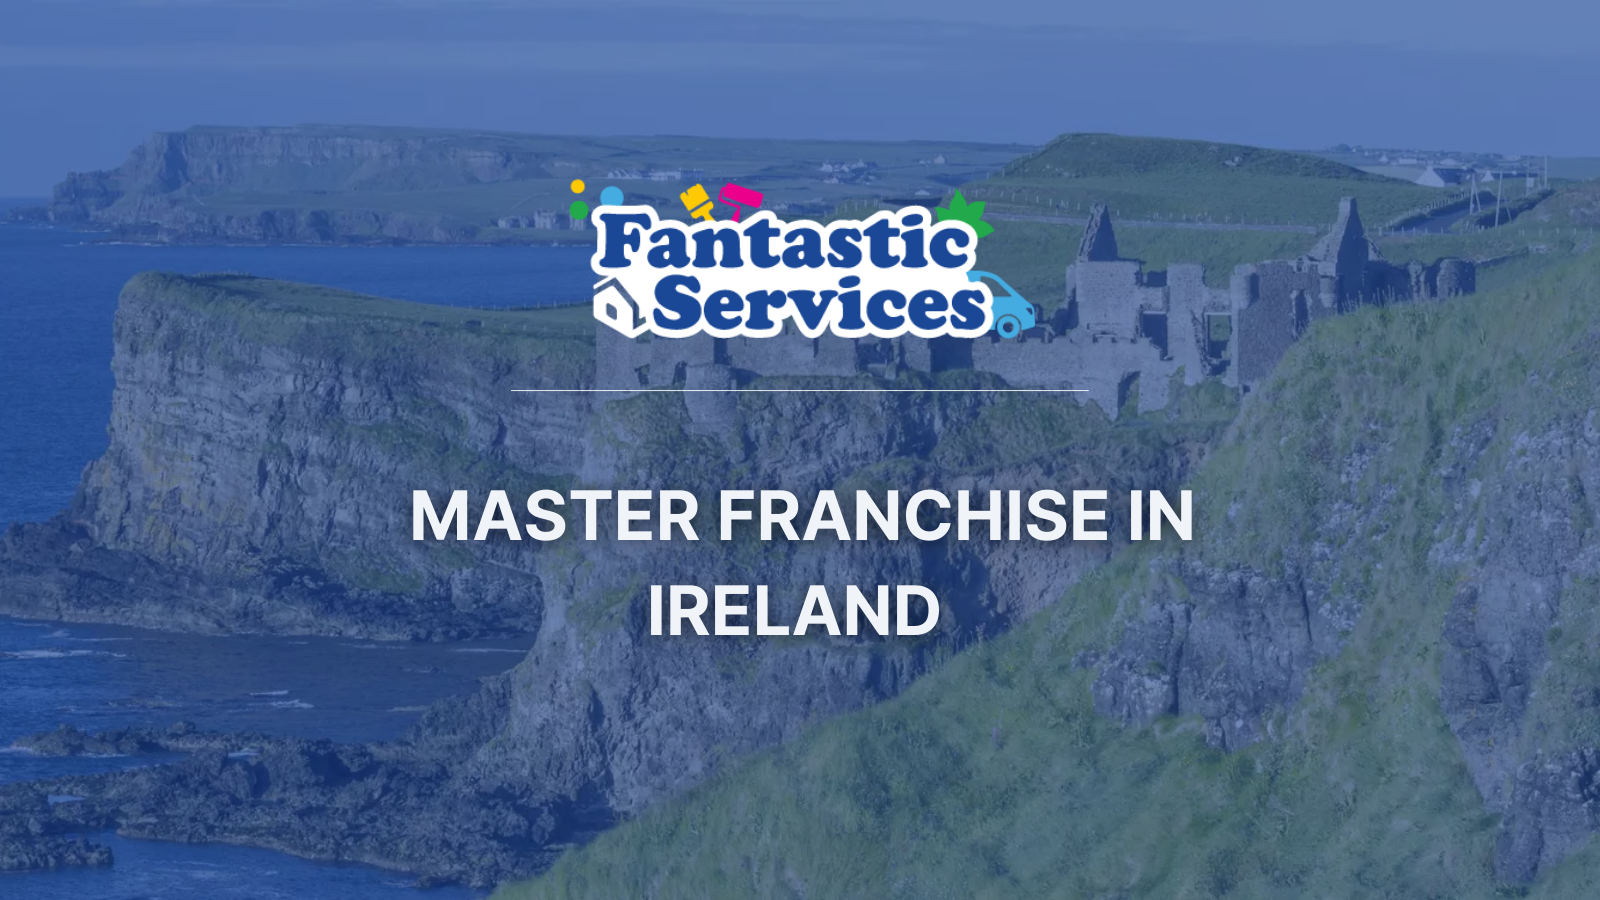 Fantastic Services Ireland Master on the backdrop of cliffs by the sea